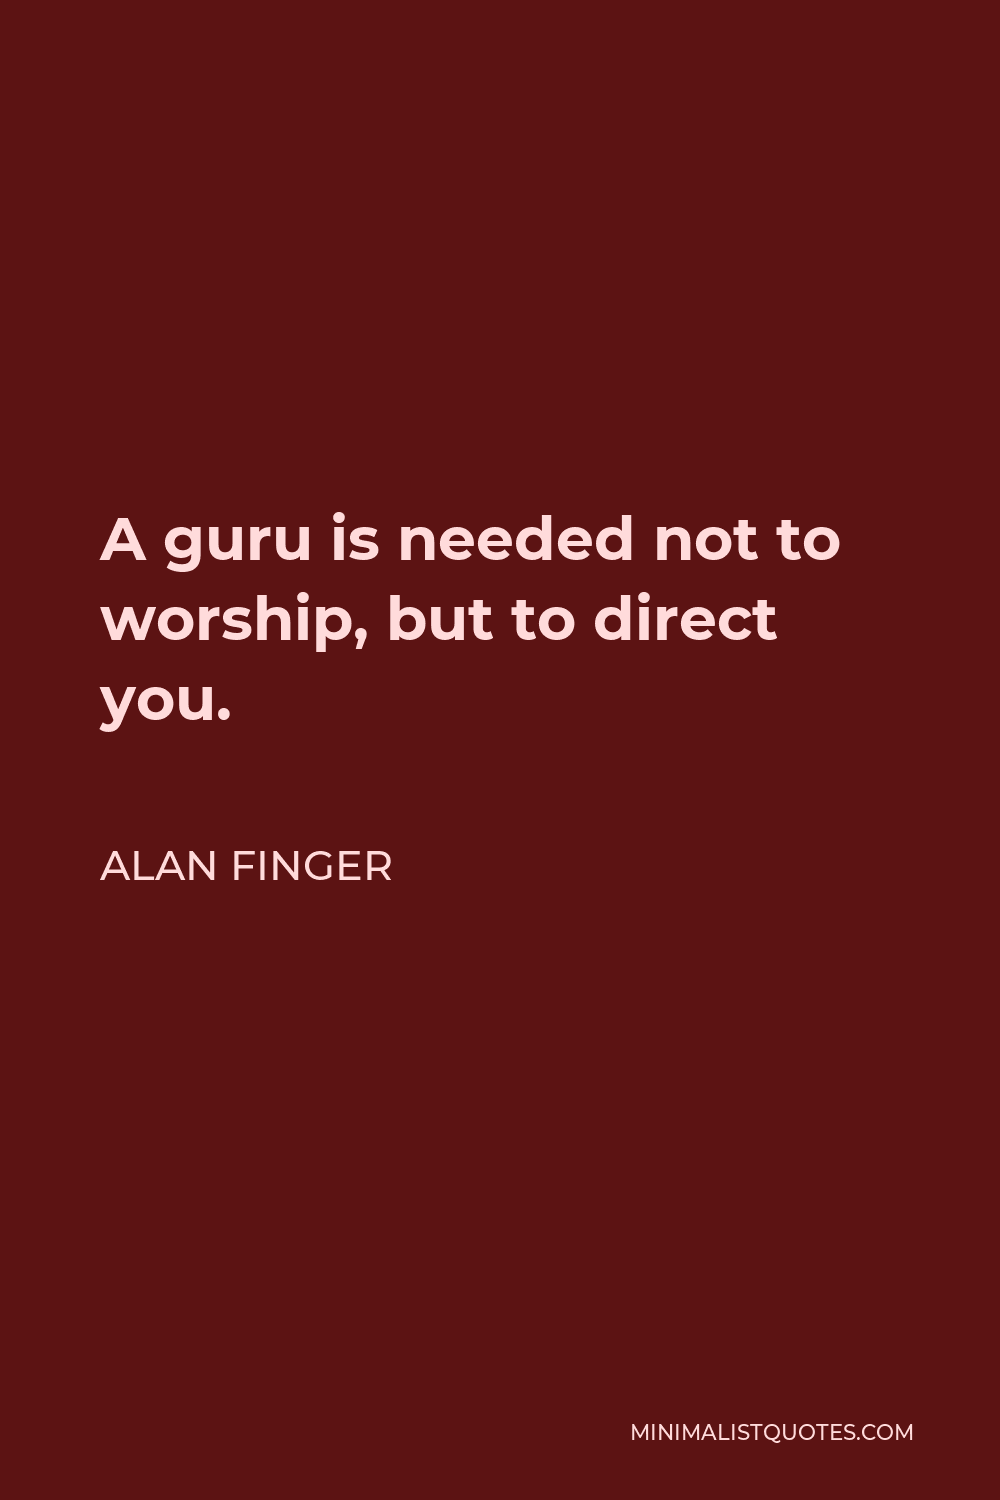 Alan Finger Quote - A guru is needed not to worship, but to direct you.